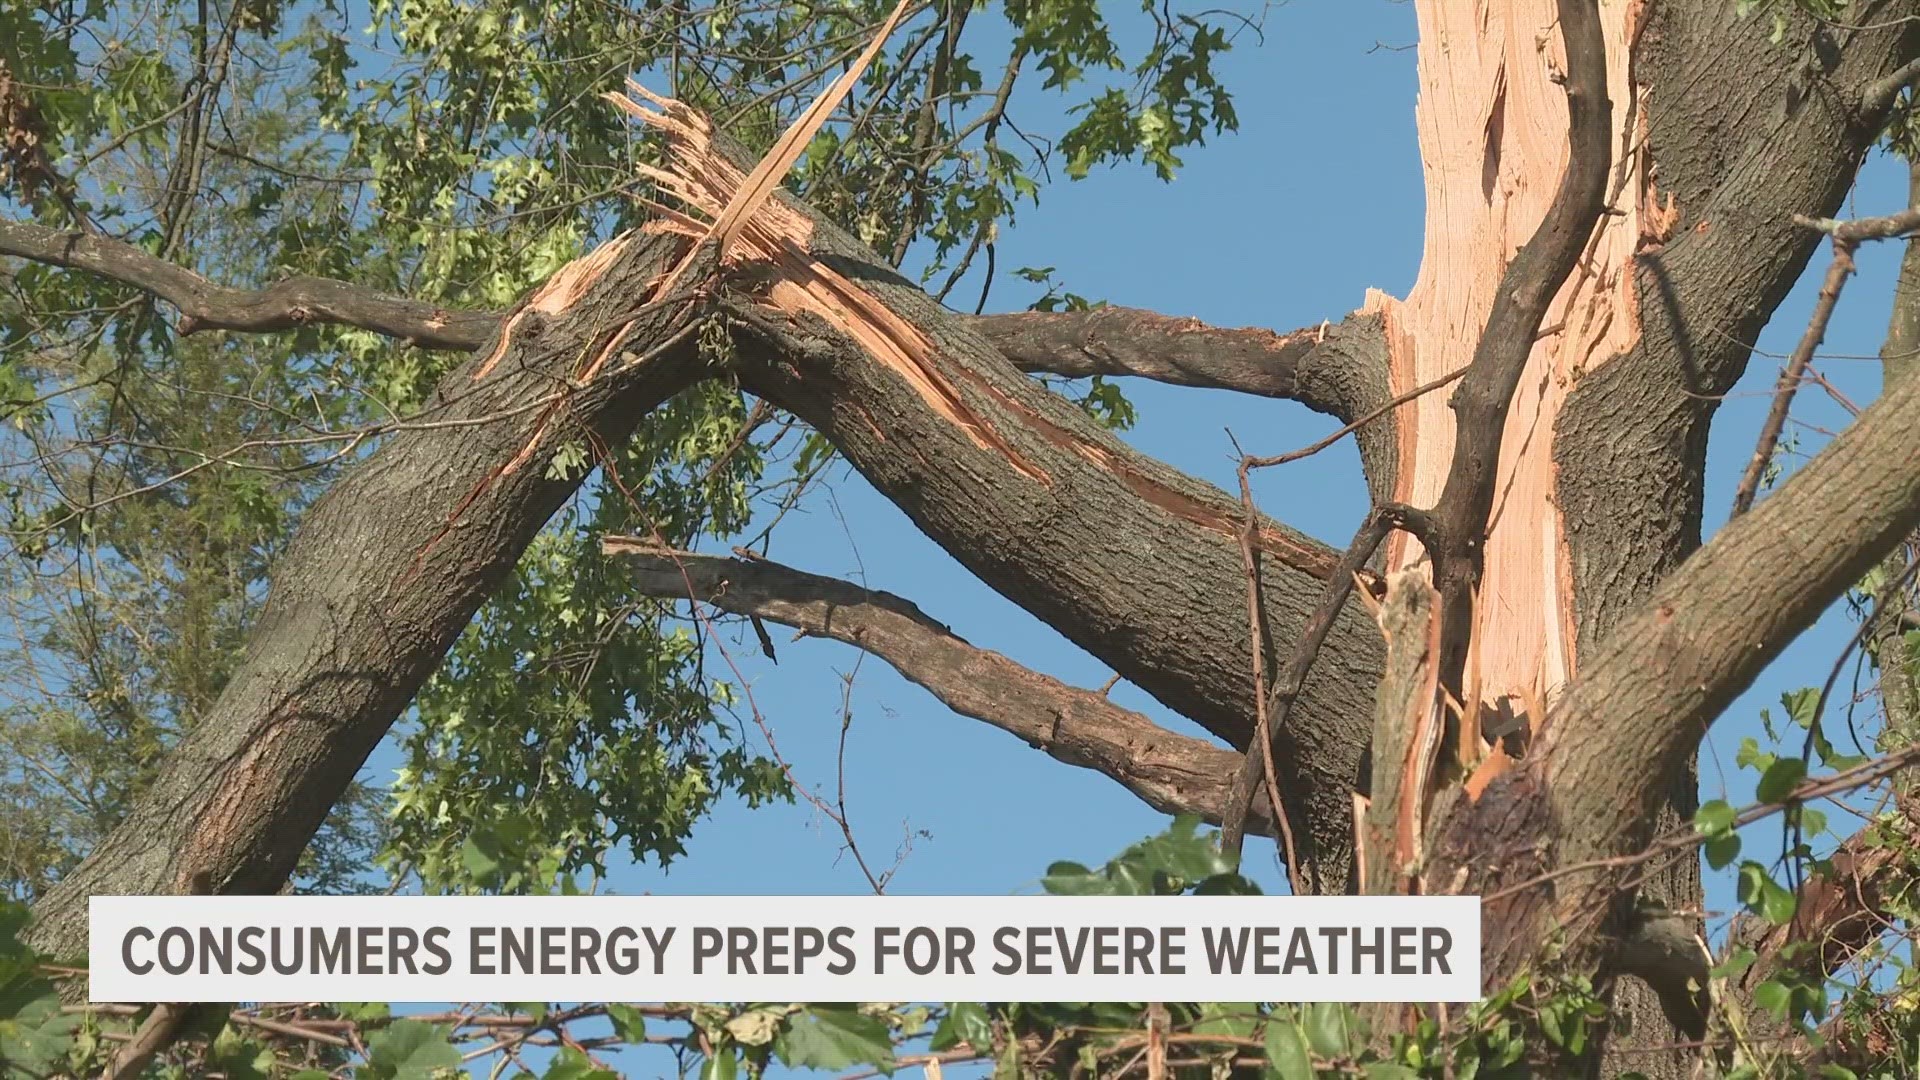 Although it's rare for Michigan to see thunderstorms during February, Consumers Energy said its crews are ready to respond.